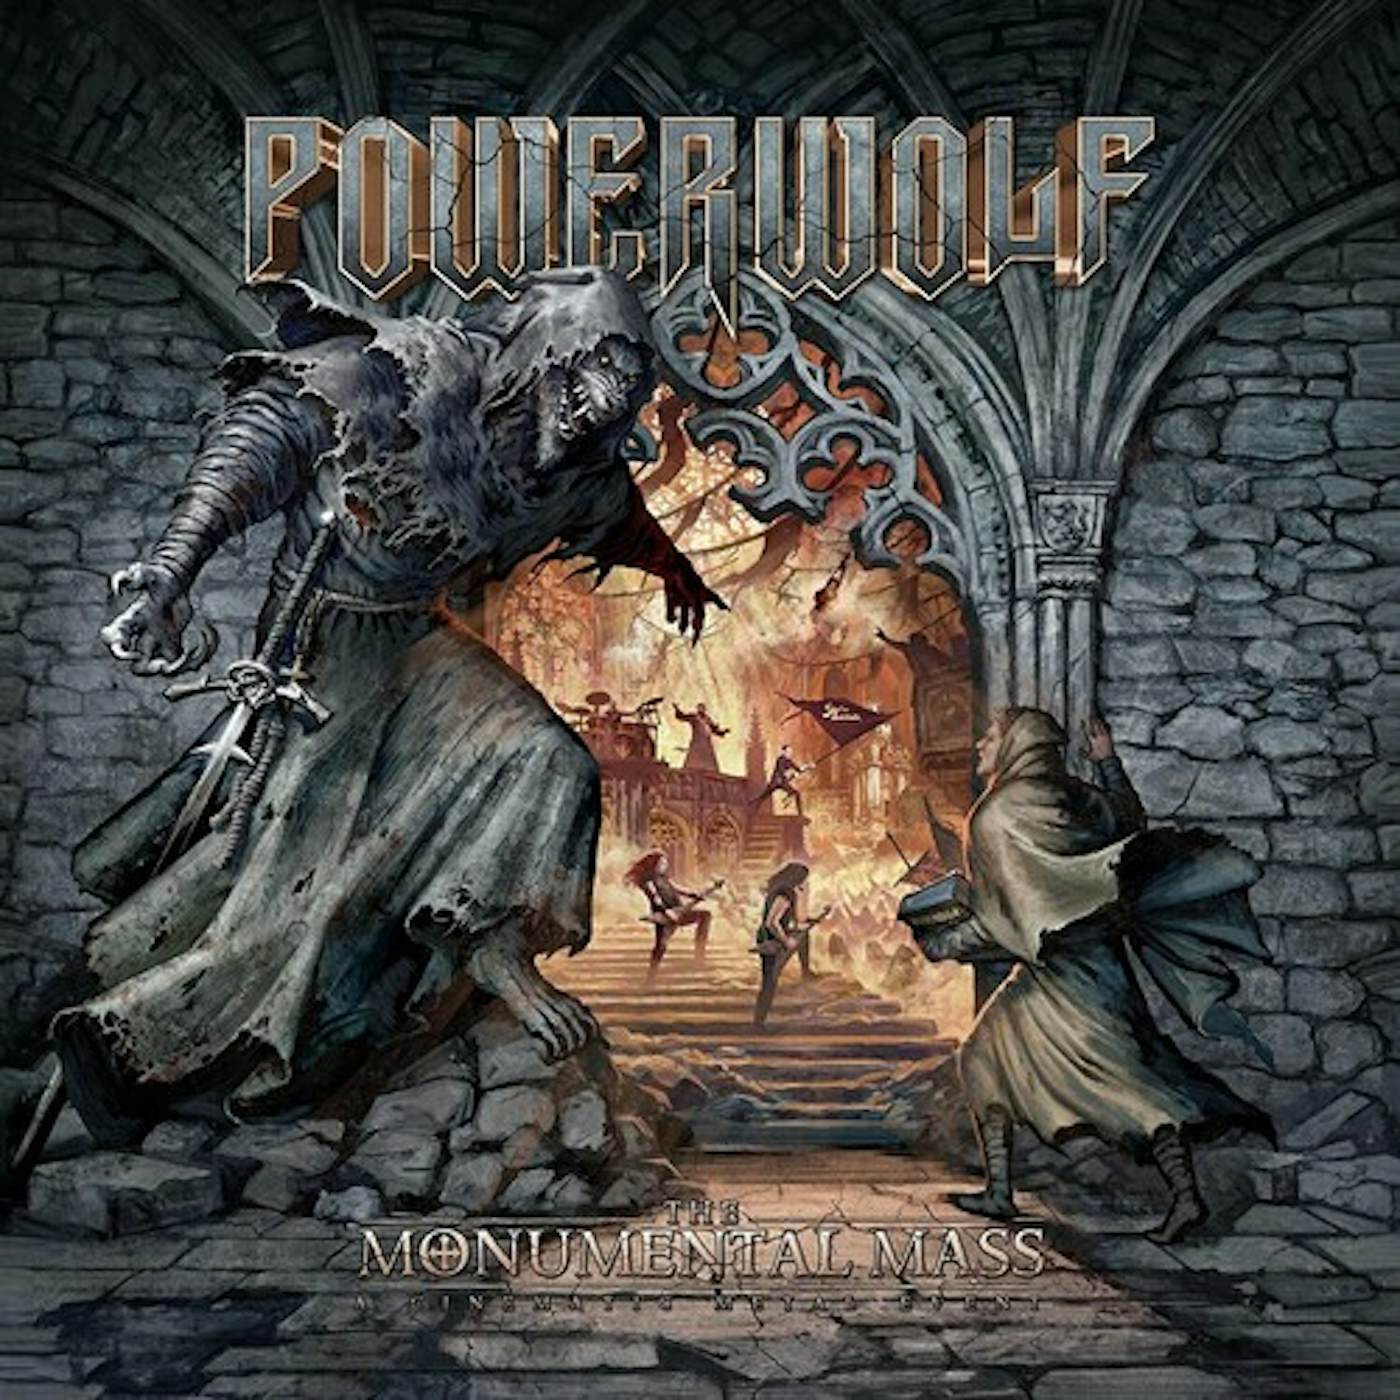 Powerwolf Posters for Sale